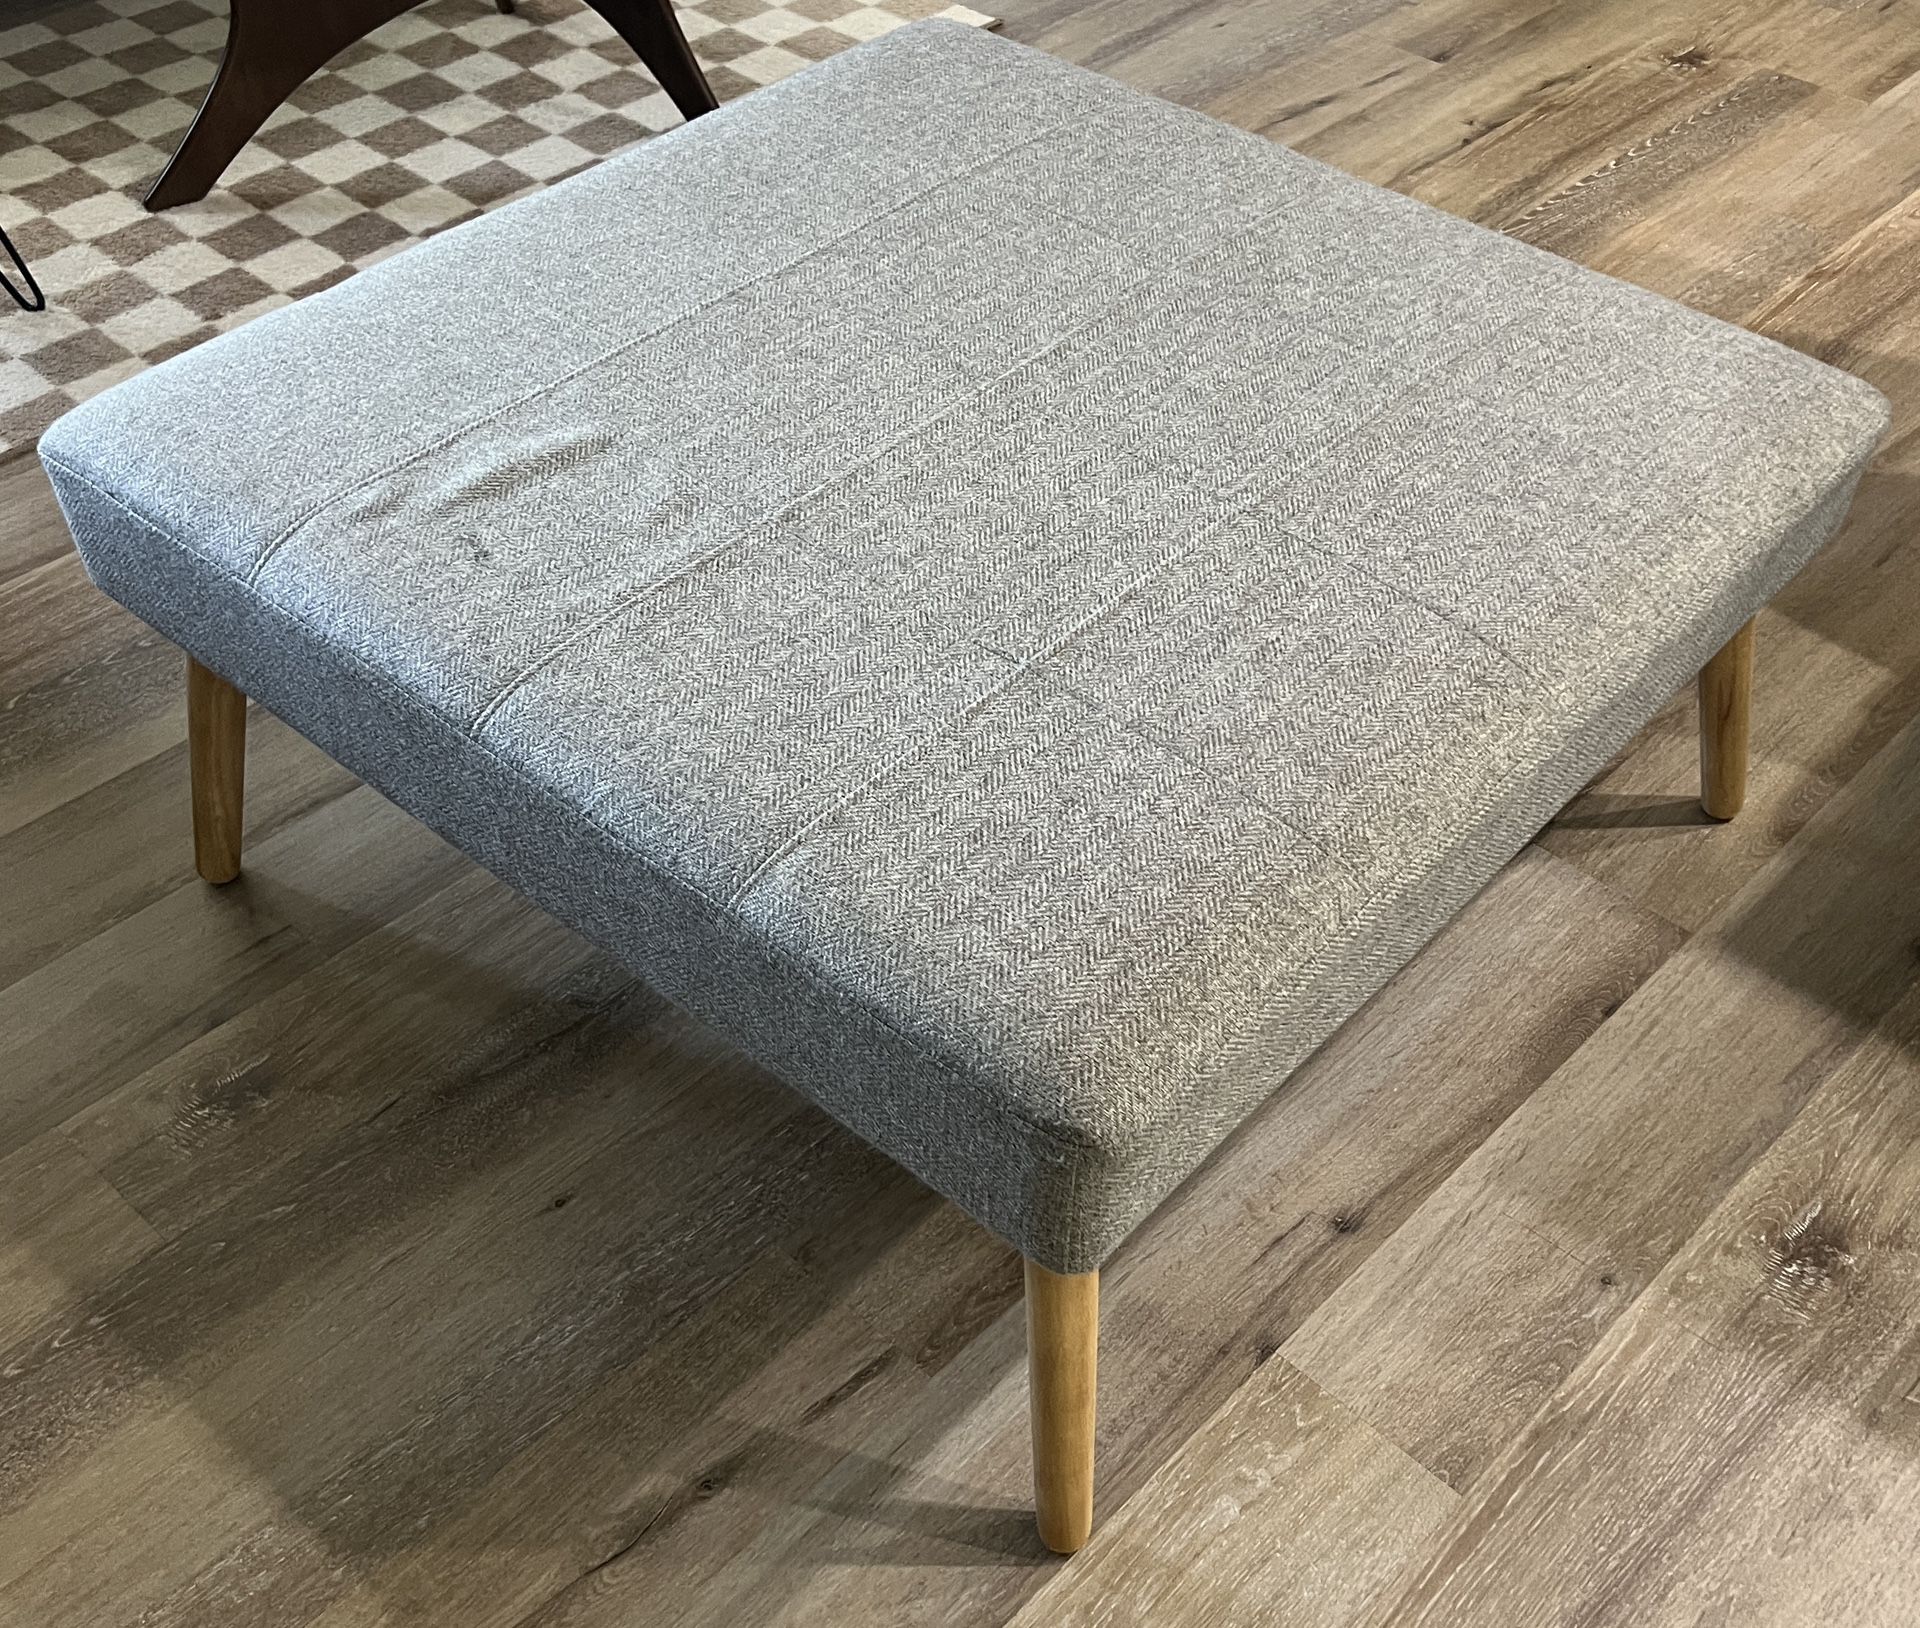 Square grey ottoman/coffee table with wood legs   